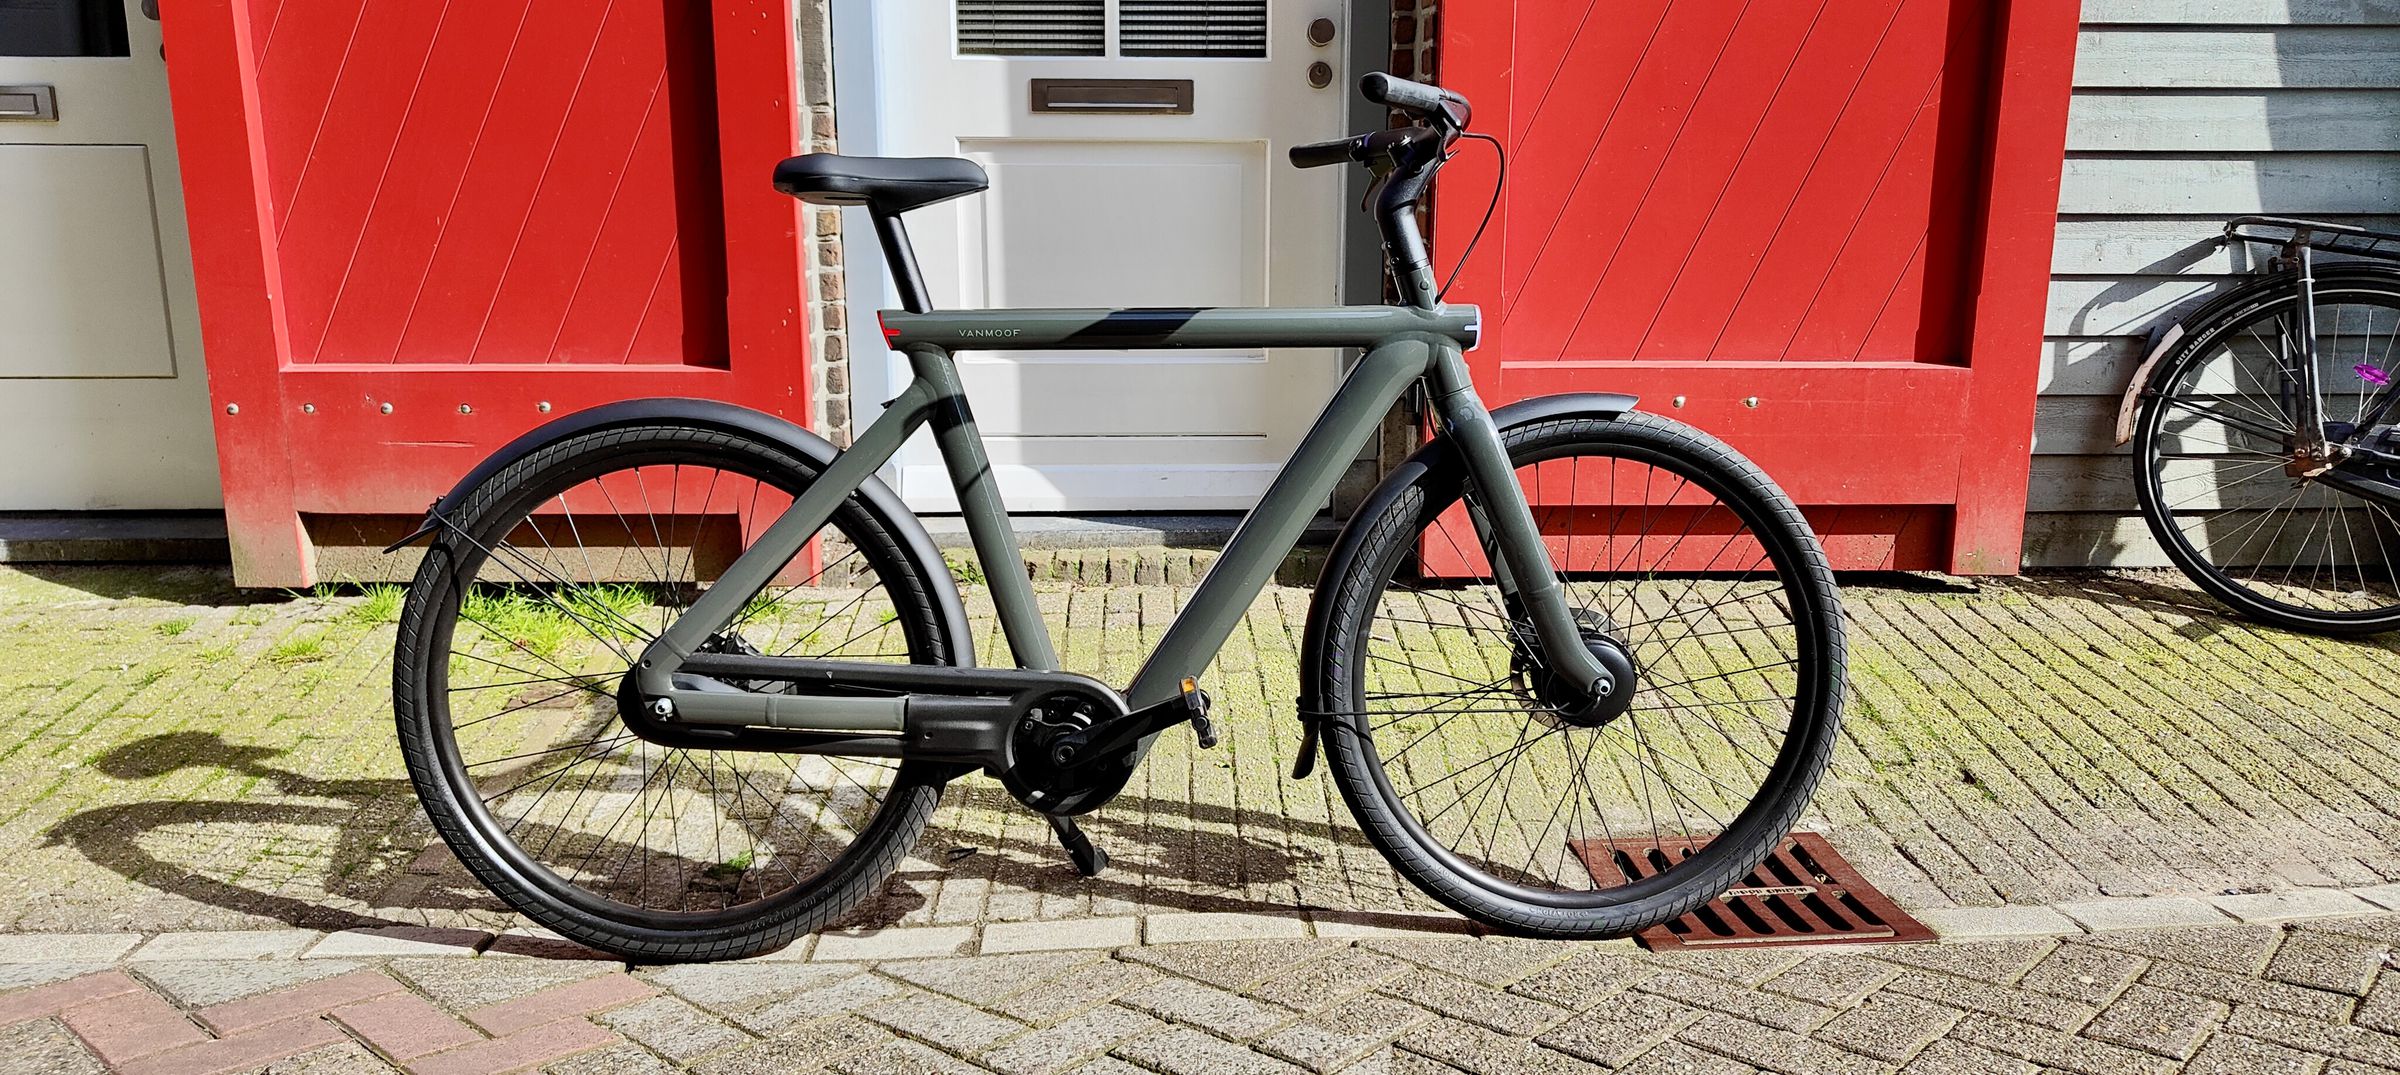 The dark gray VanMoof S5: too complex for its own good?